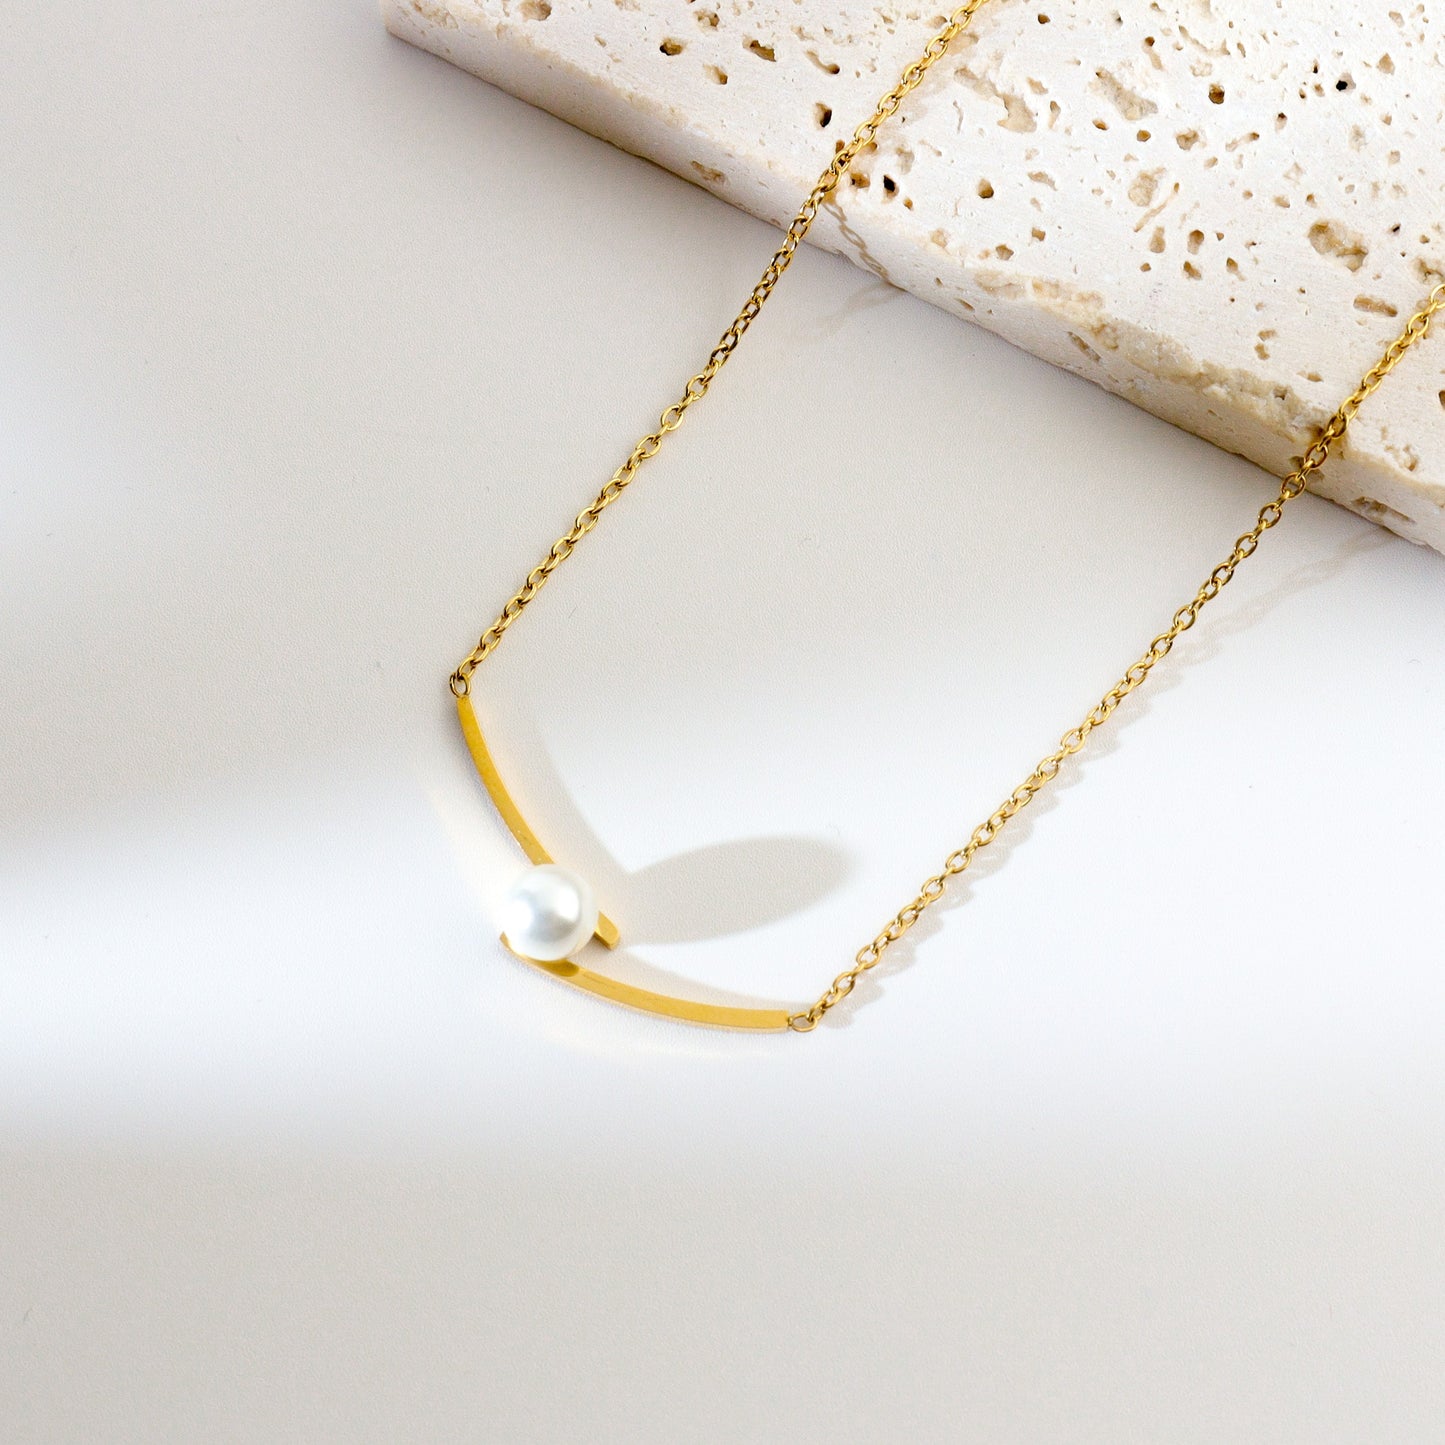 Gulf of Pearl Gold Necklace